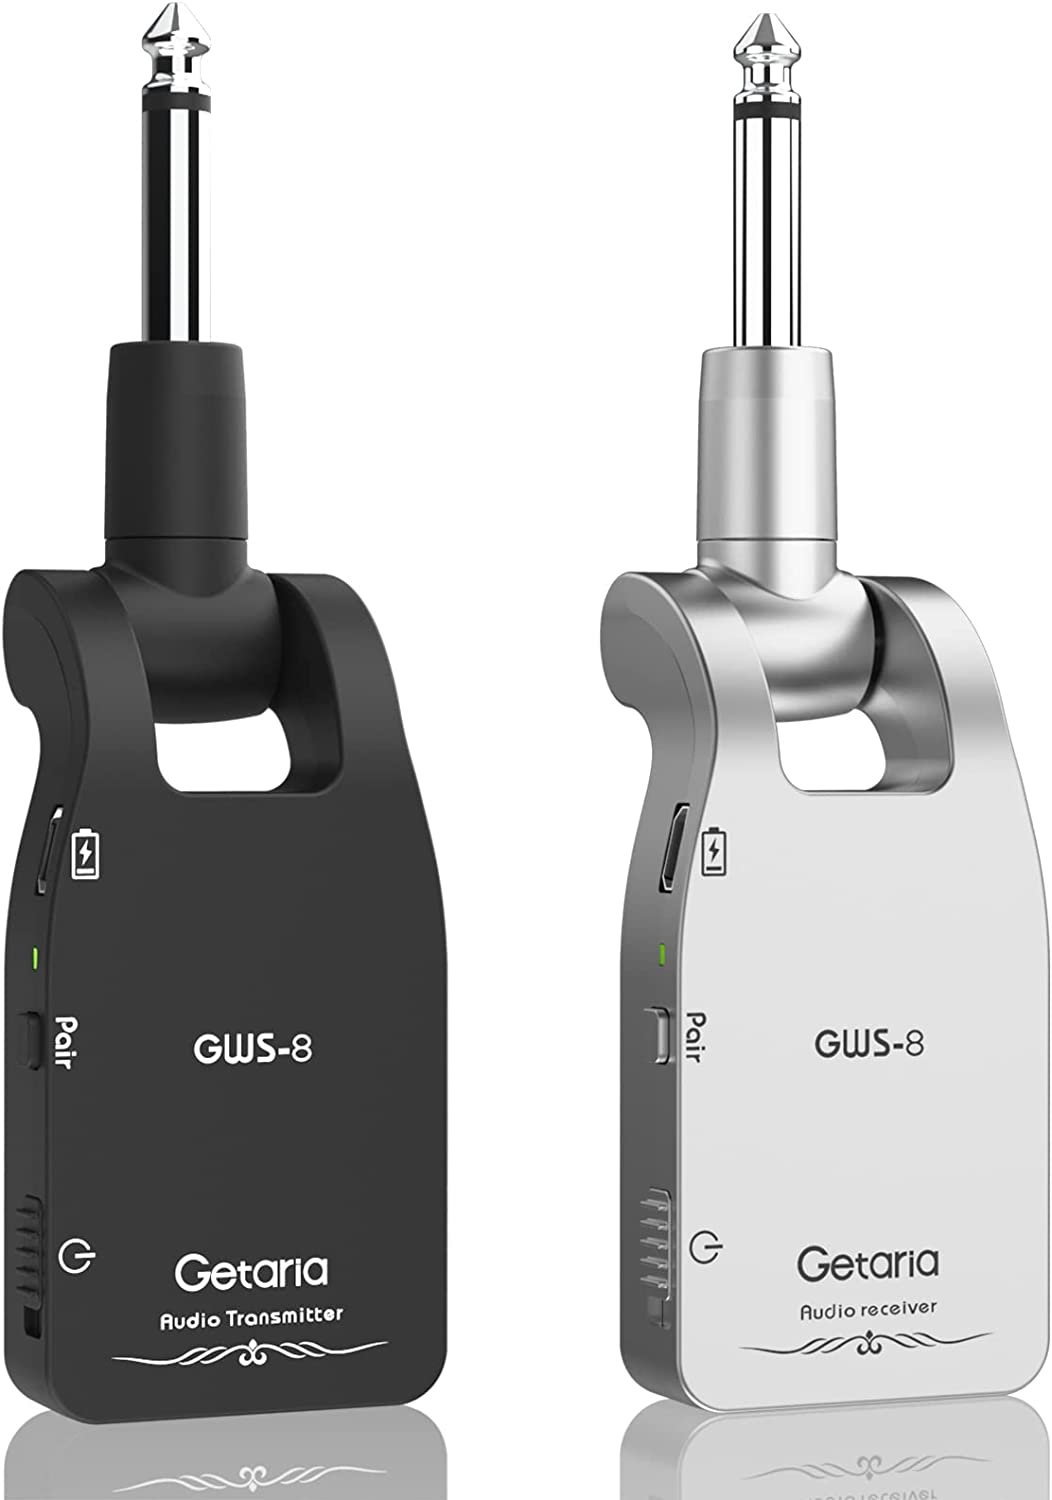 Getaria Upgrade 2.4GHZ Wireless Guitar System on a white background